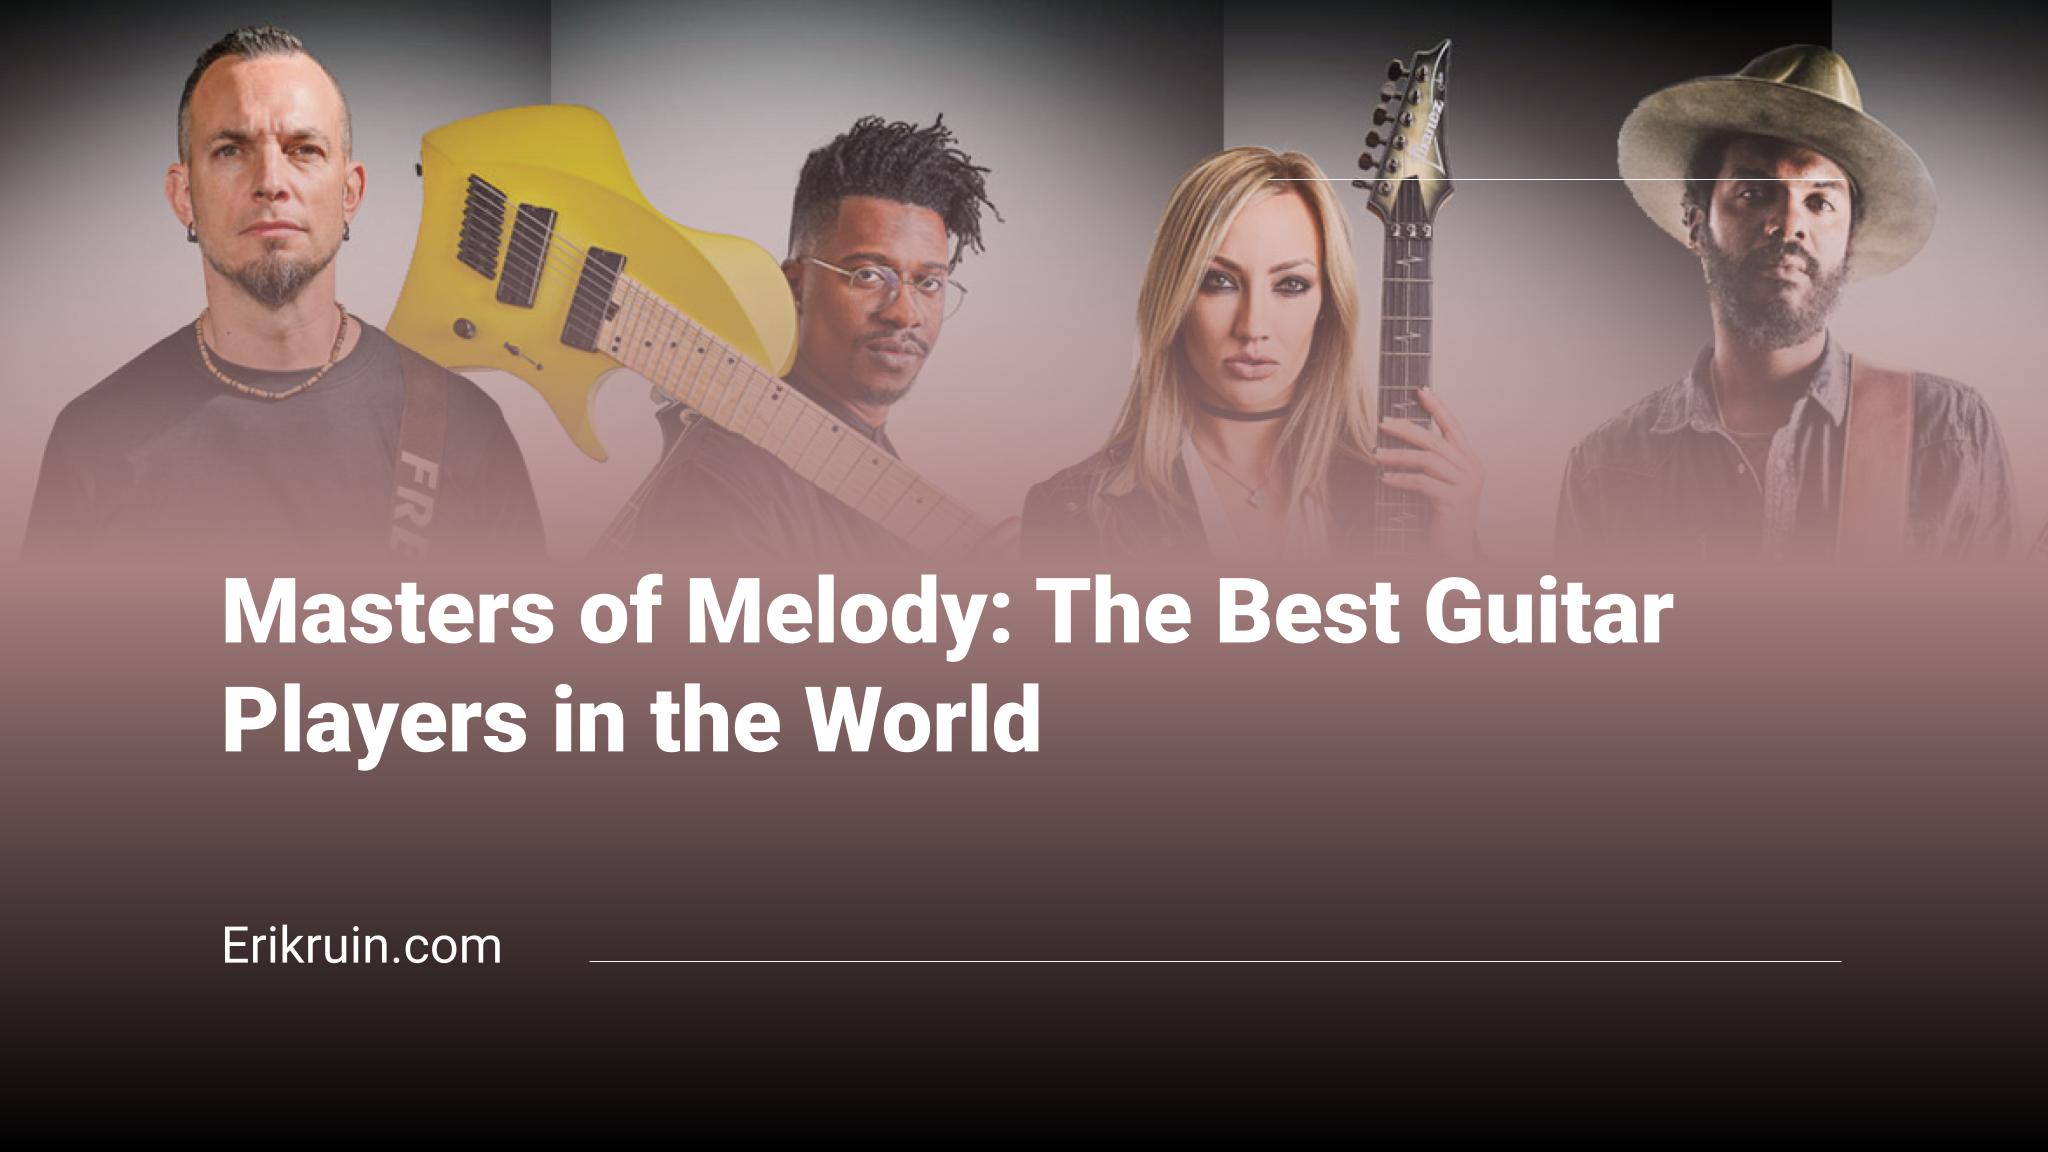 The Best Guitar Players in the World